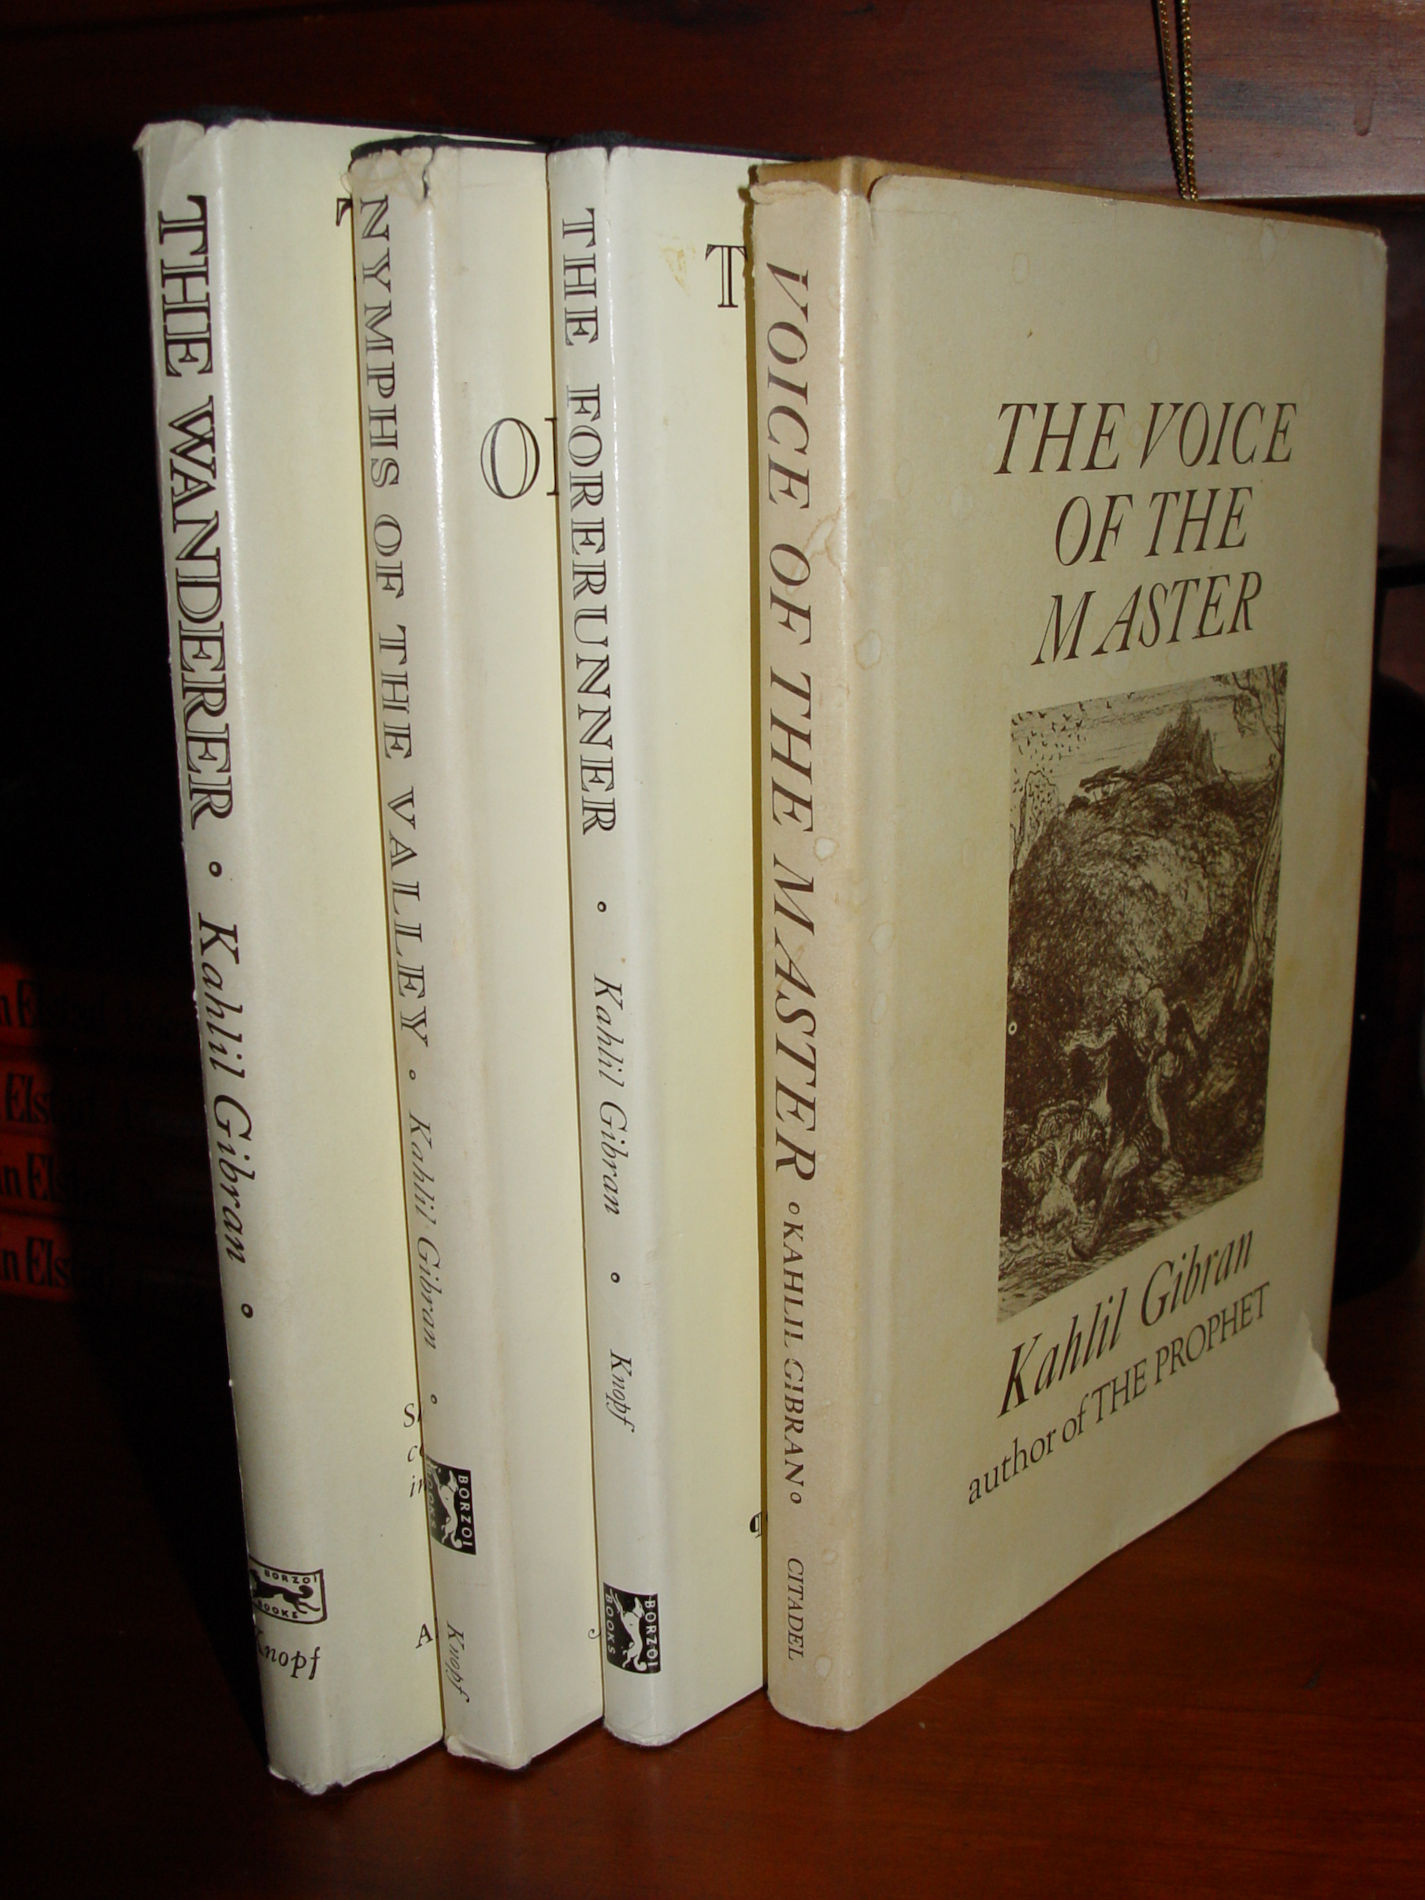 Kahlil Gibran Classics; The Prophet, The
                        Forerunner, Nymphs of the Valley, The Voice of
                        the Master